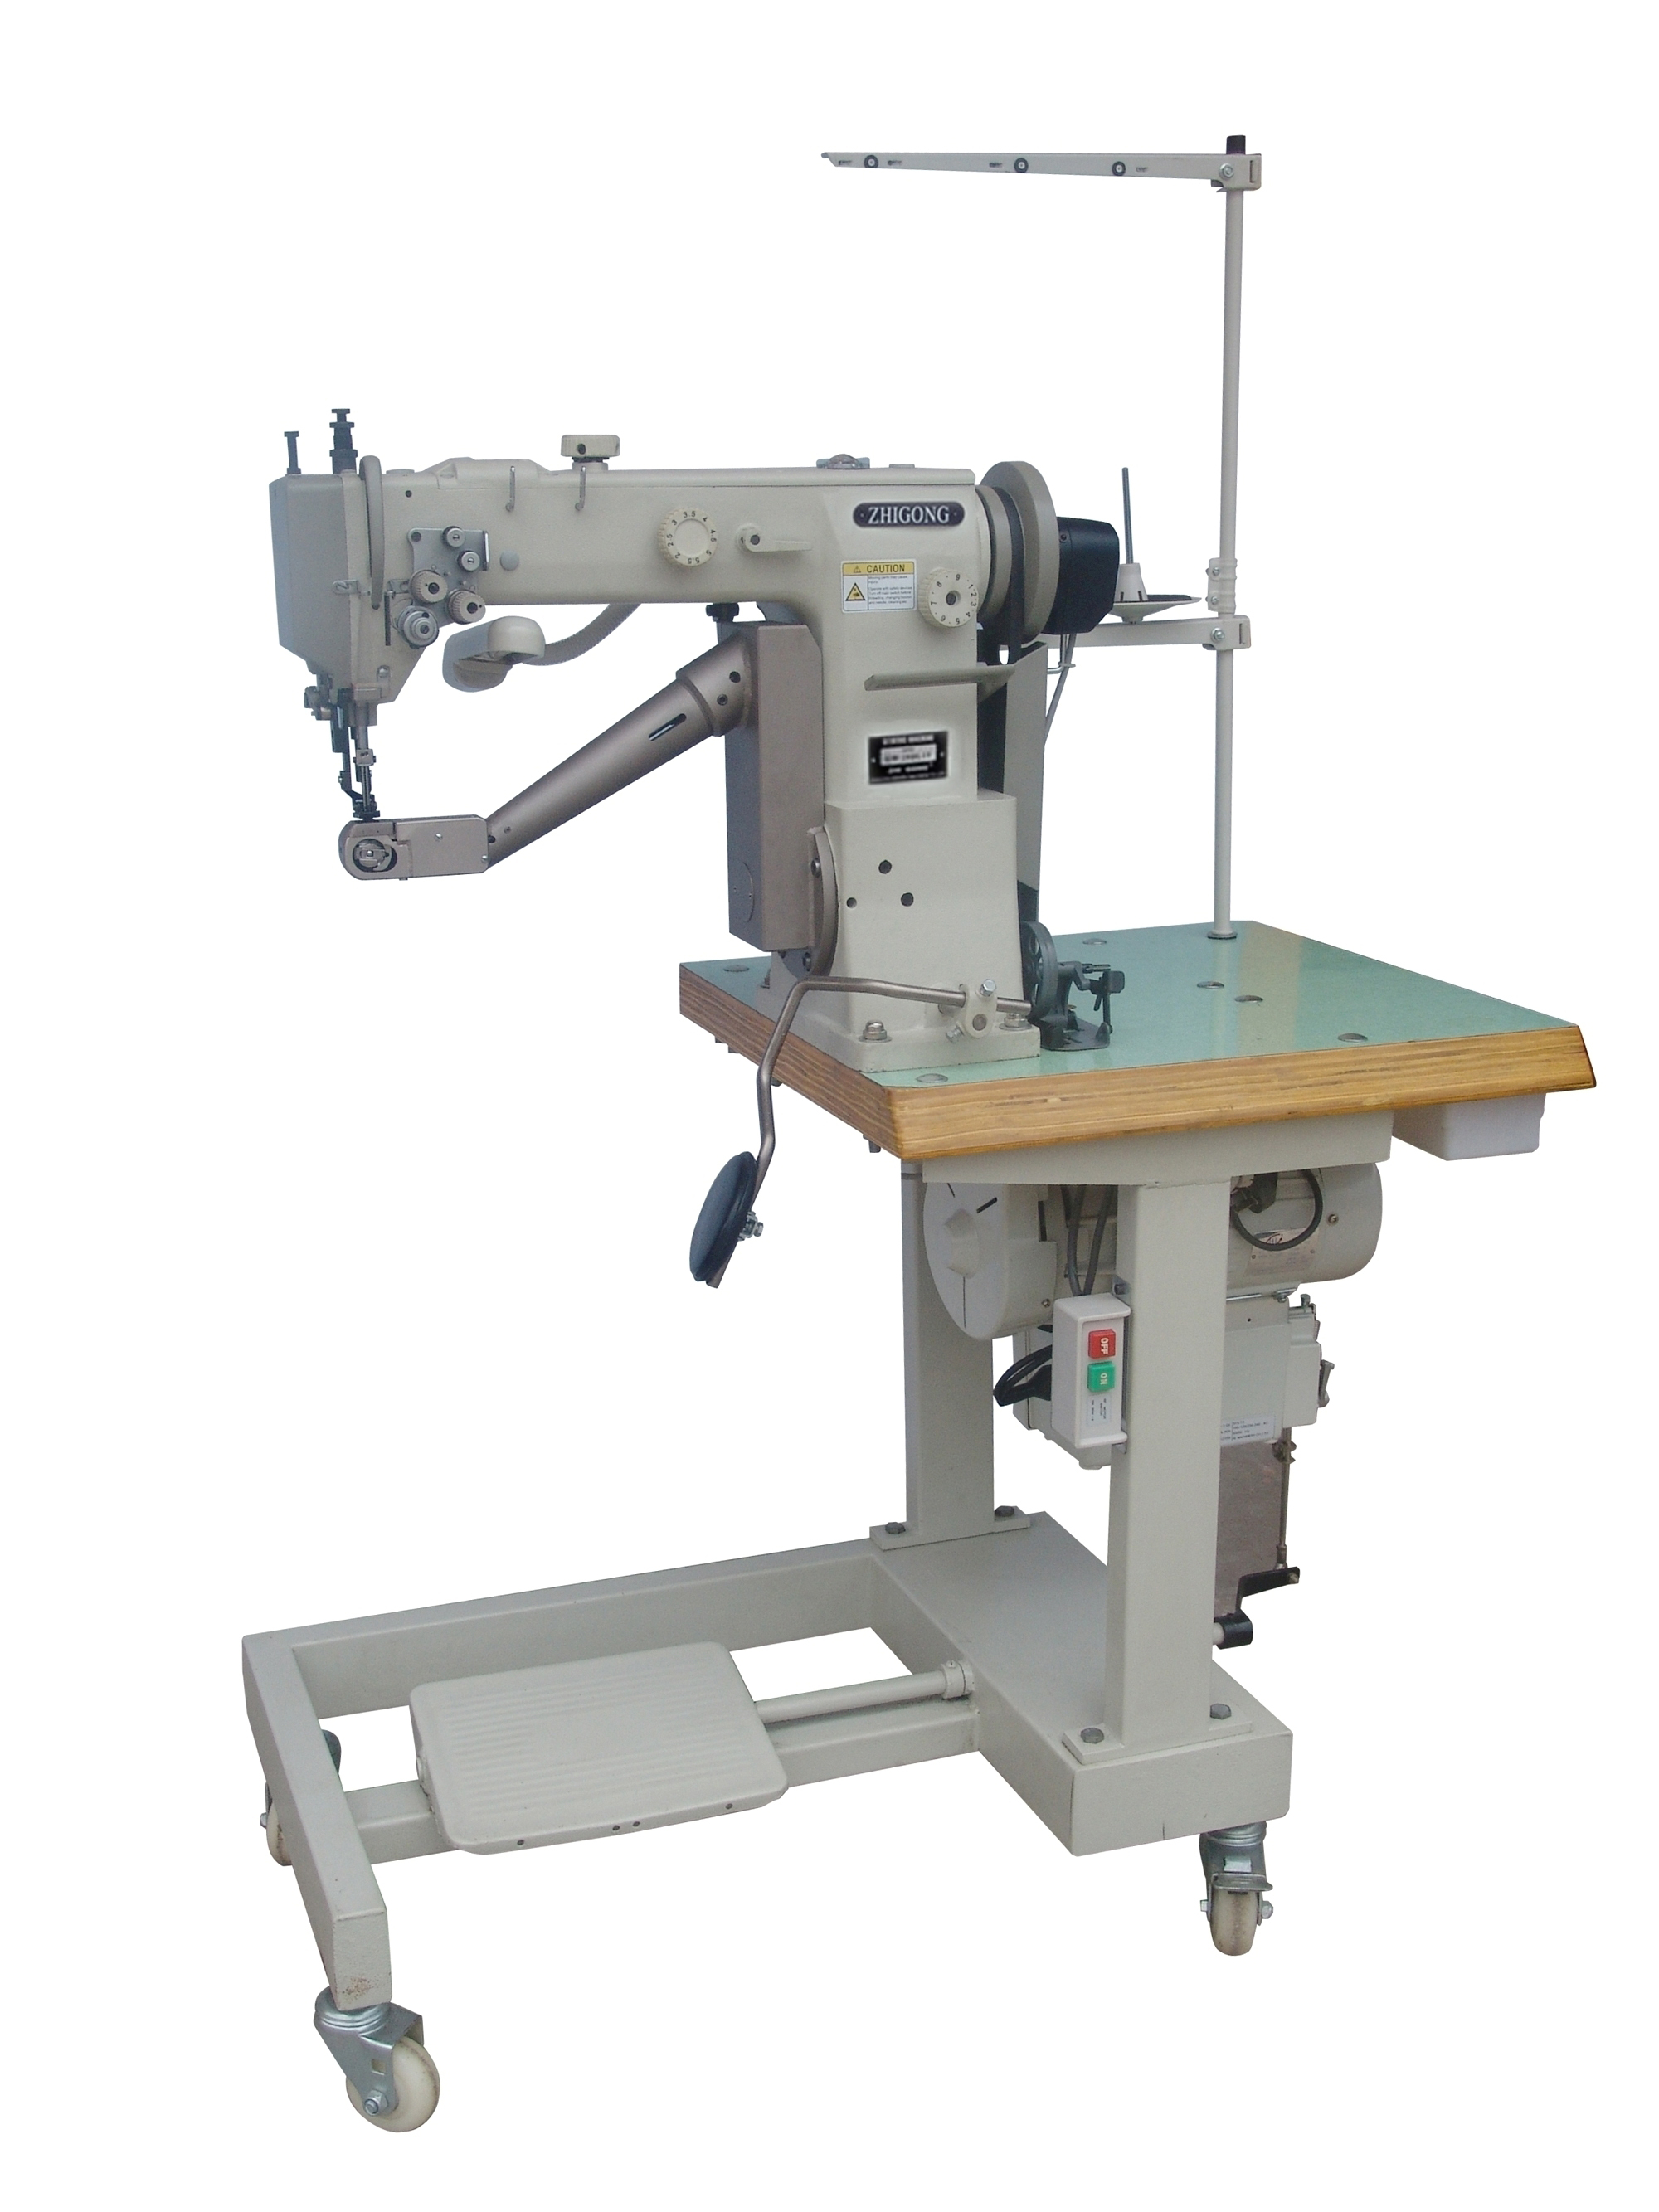 GA-1400  Double-needle up and down unison feed brace sewing machine